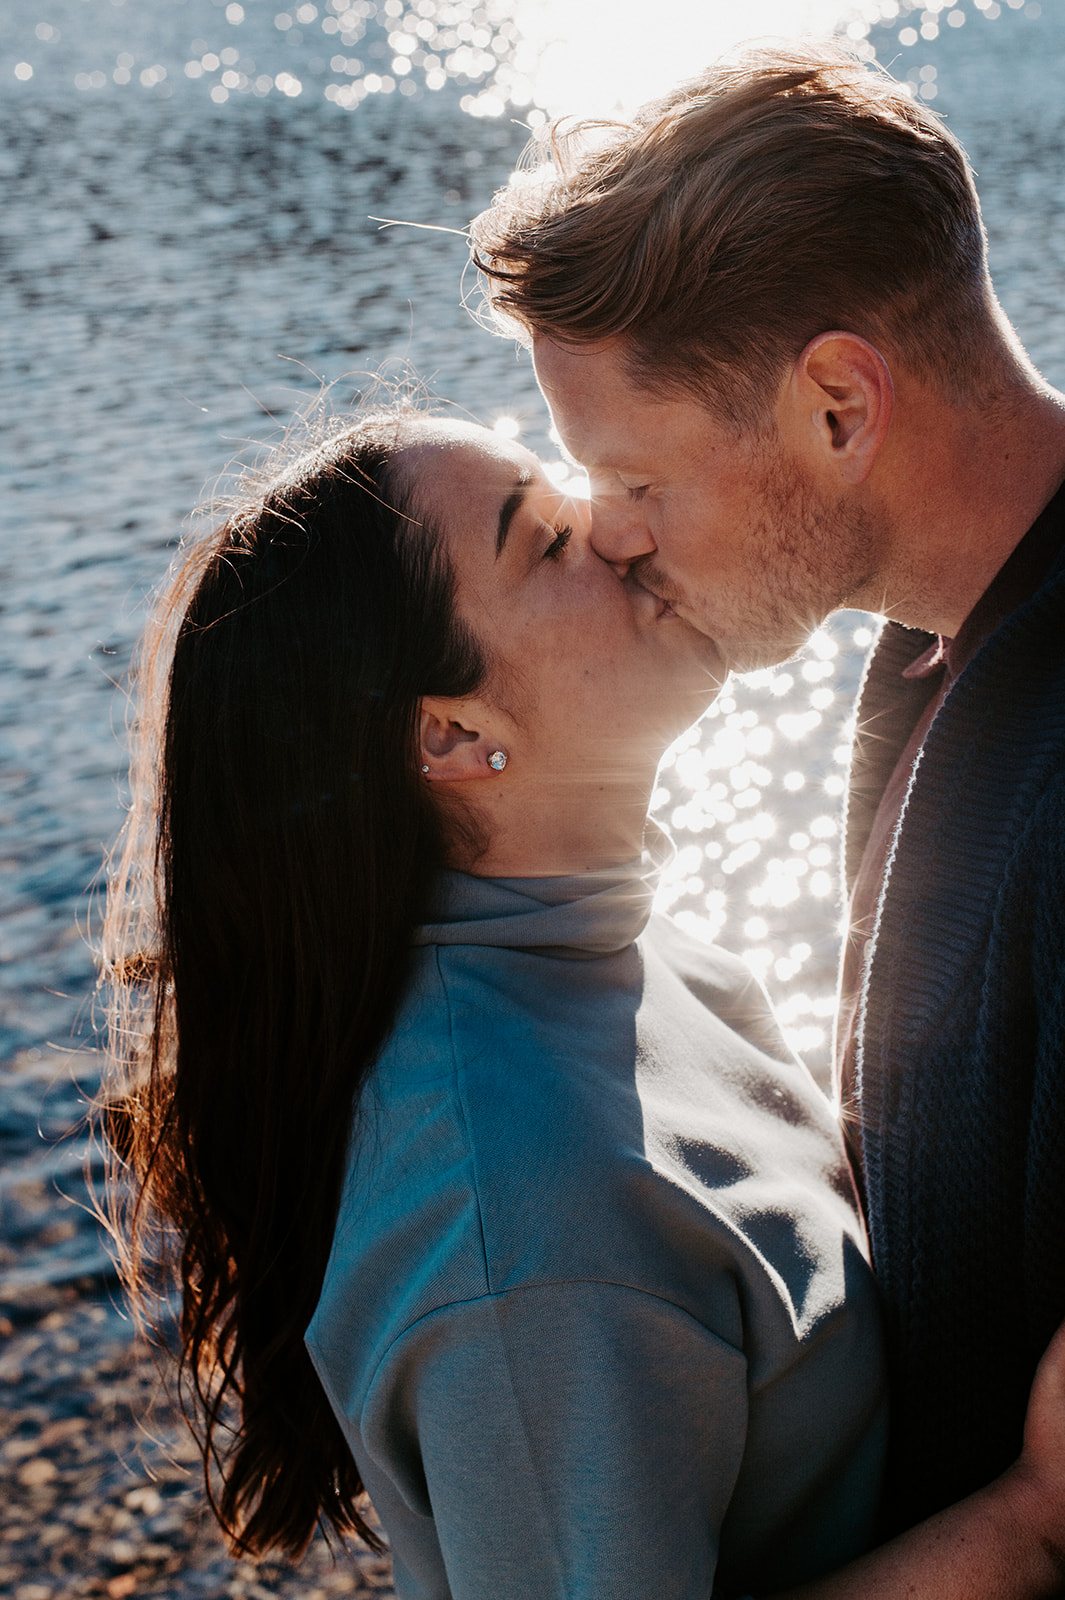 A couple sharing a kiss by the sparkling water, with sunlight reflecting off the surface and creating a romantic glow around them.